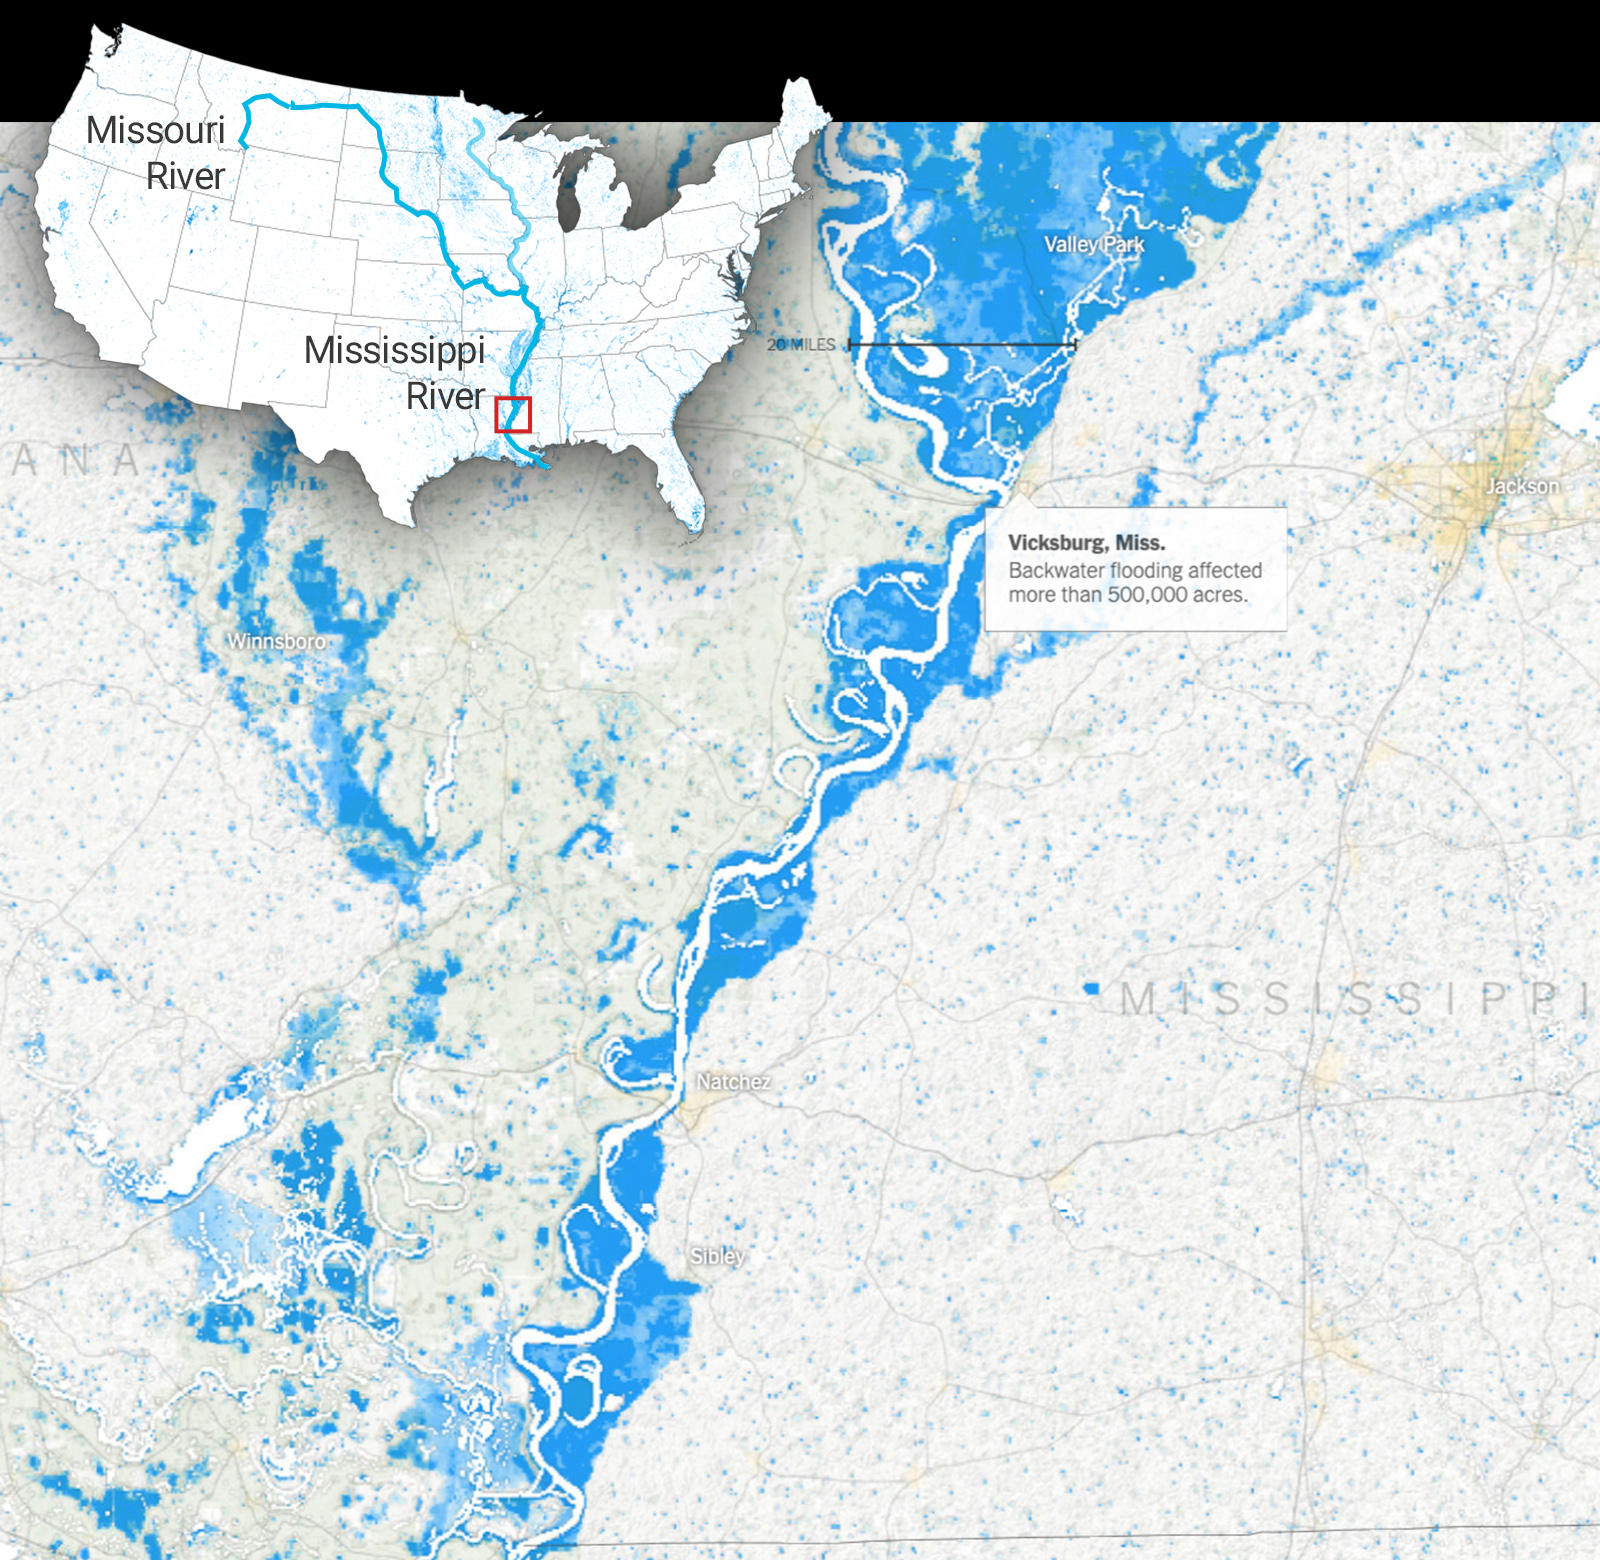 A graphic showing floodwaters in the MidWest in blue against a white background. In the upper left corner, a map of the U.S. shows which portion of the country is shown in the image. A small box indicates Vicksburg, Mississippi, and the damage done there.